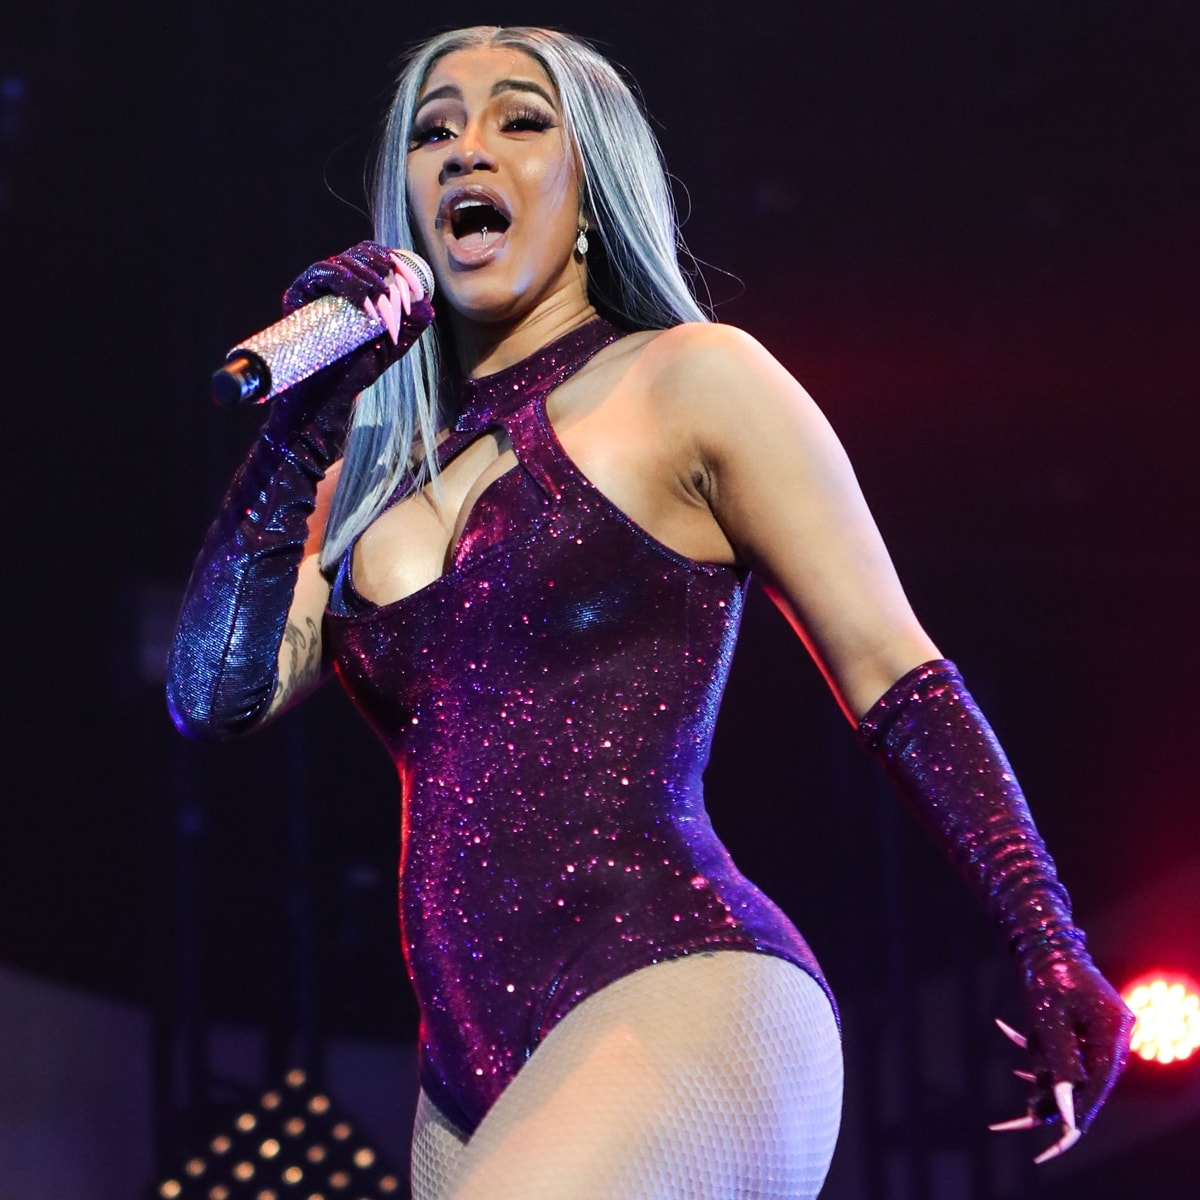 Cardi B sings about Christian Louboutin's red sole shoes in her breakout hit "Bodak Yellow"